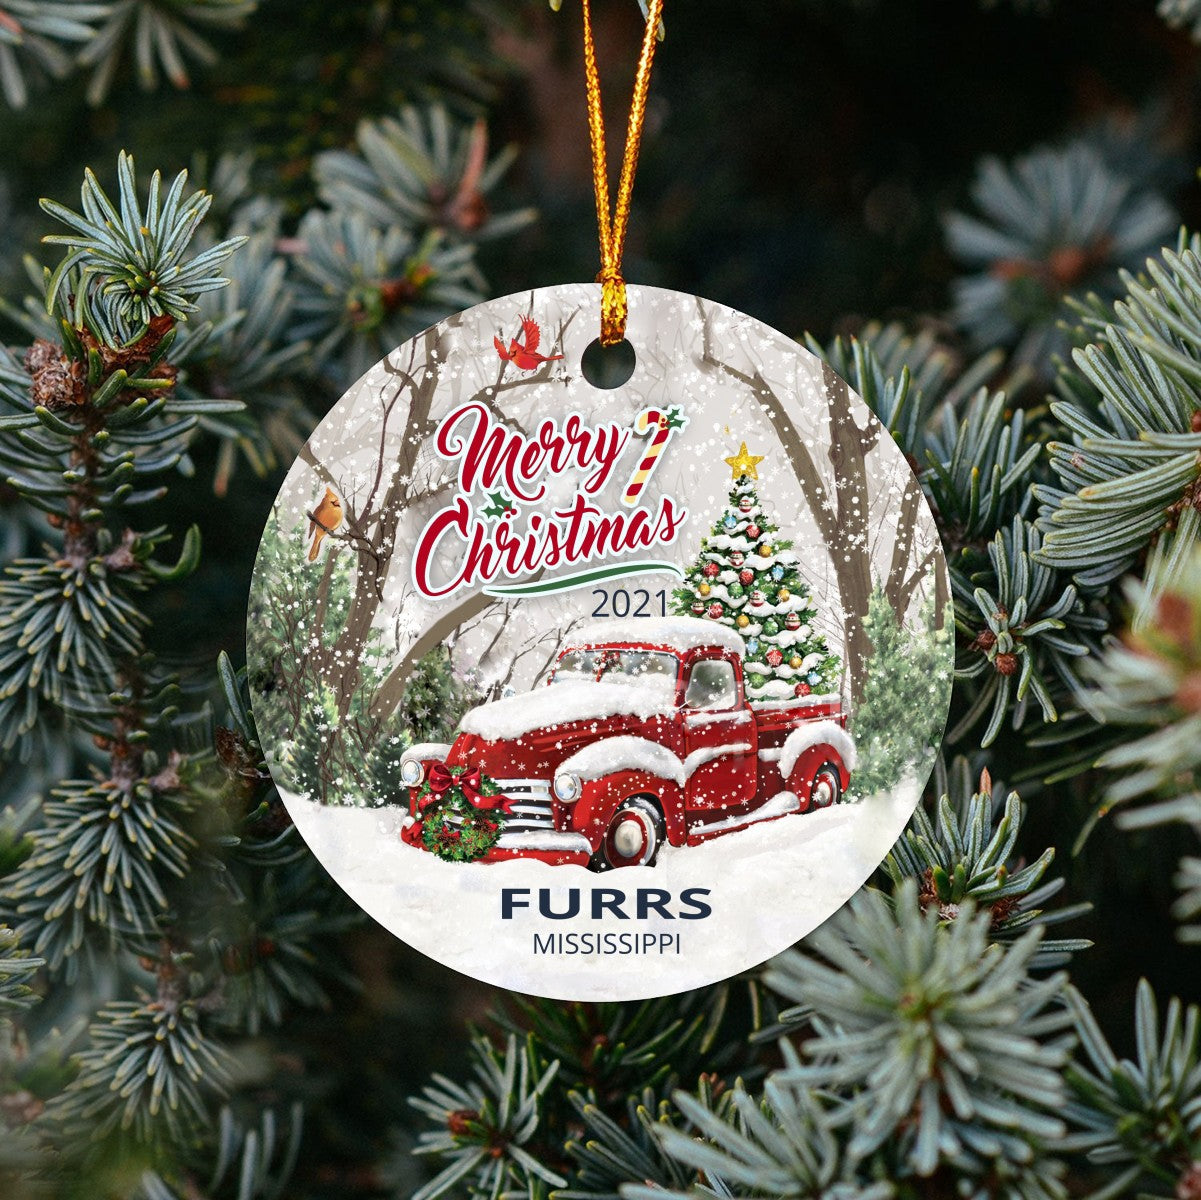 Christmas Tree Ornaments Furrs - Ornament With Name City, State Furrs Mississippi MS Ornament - Red Truck Xmas Ornaments 3'' Plastic Gift For Family, Friend And Housewarming